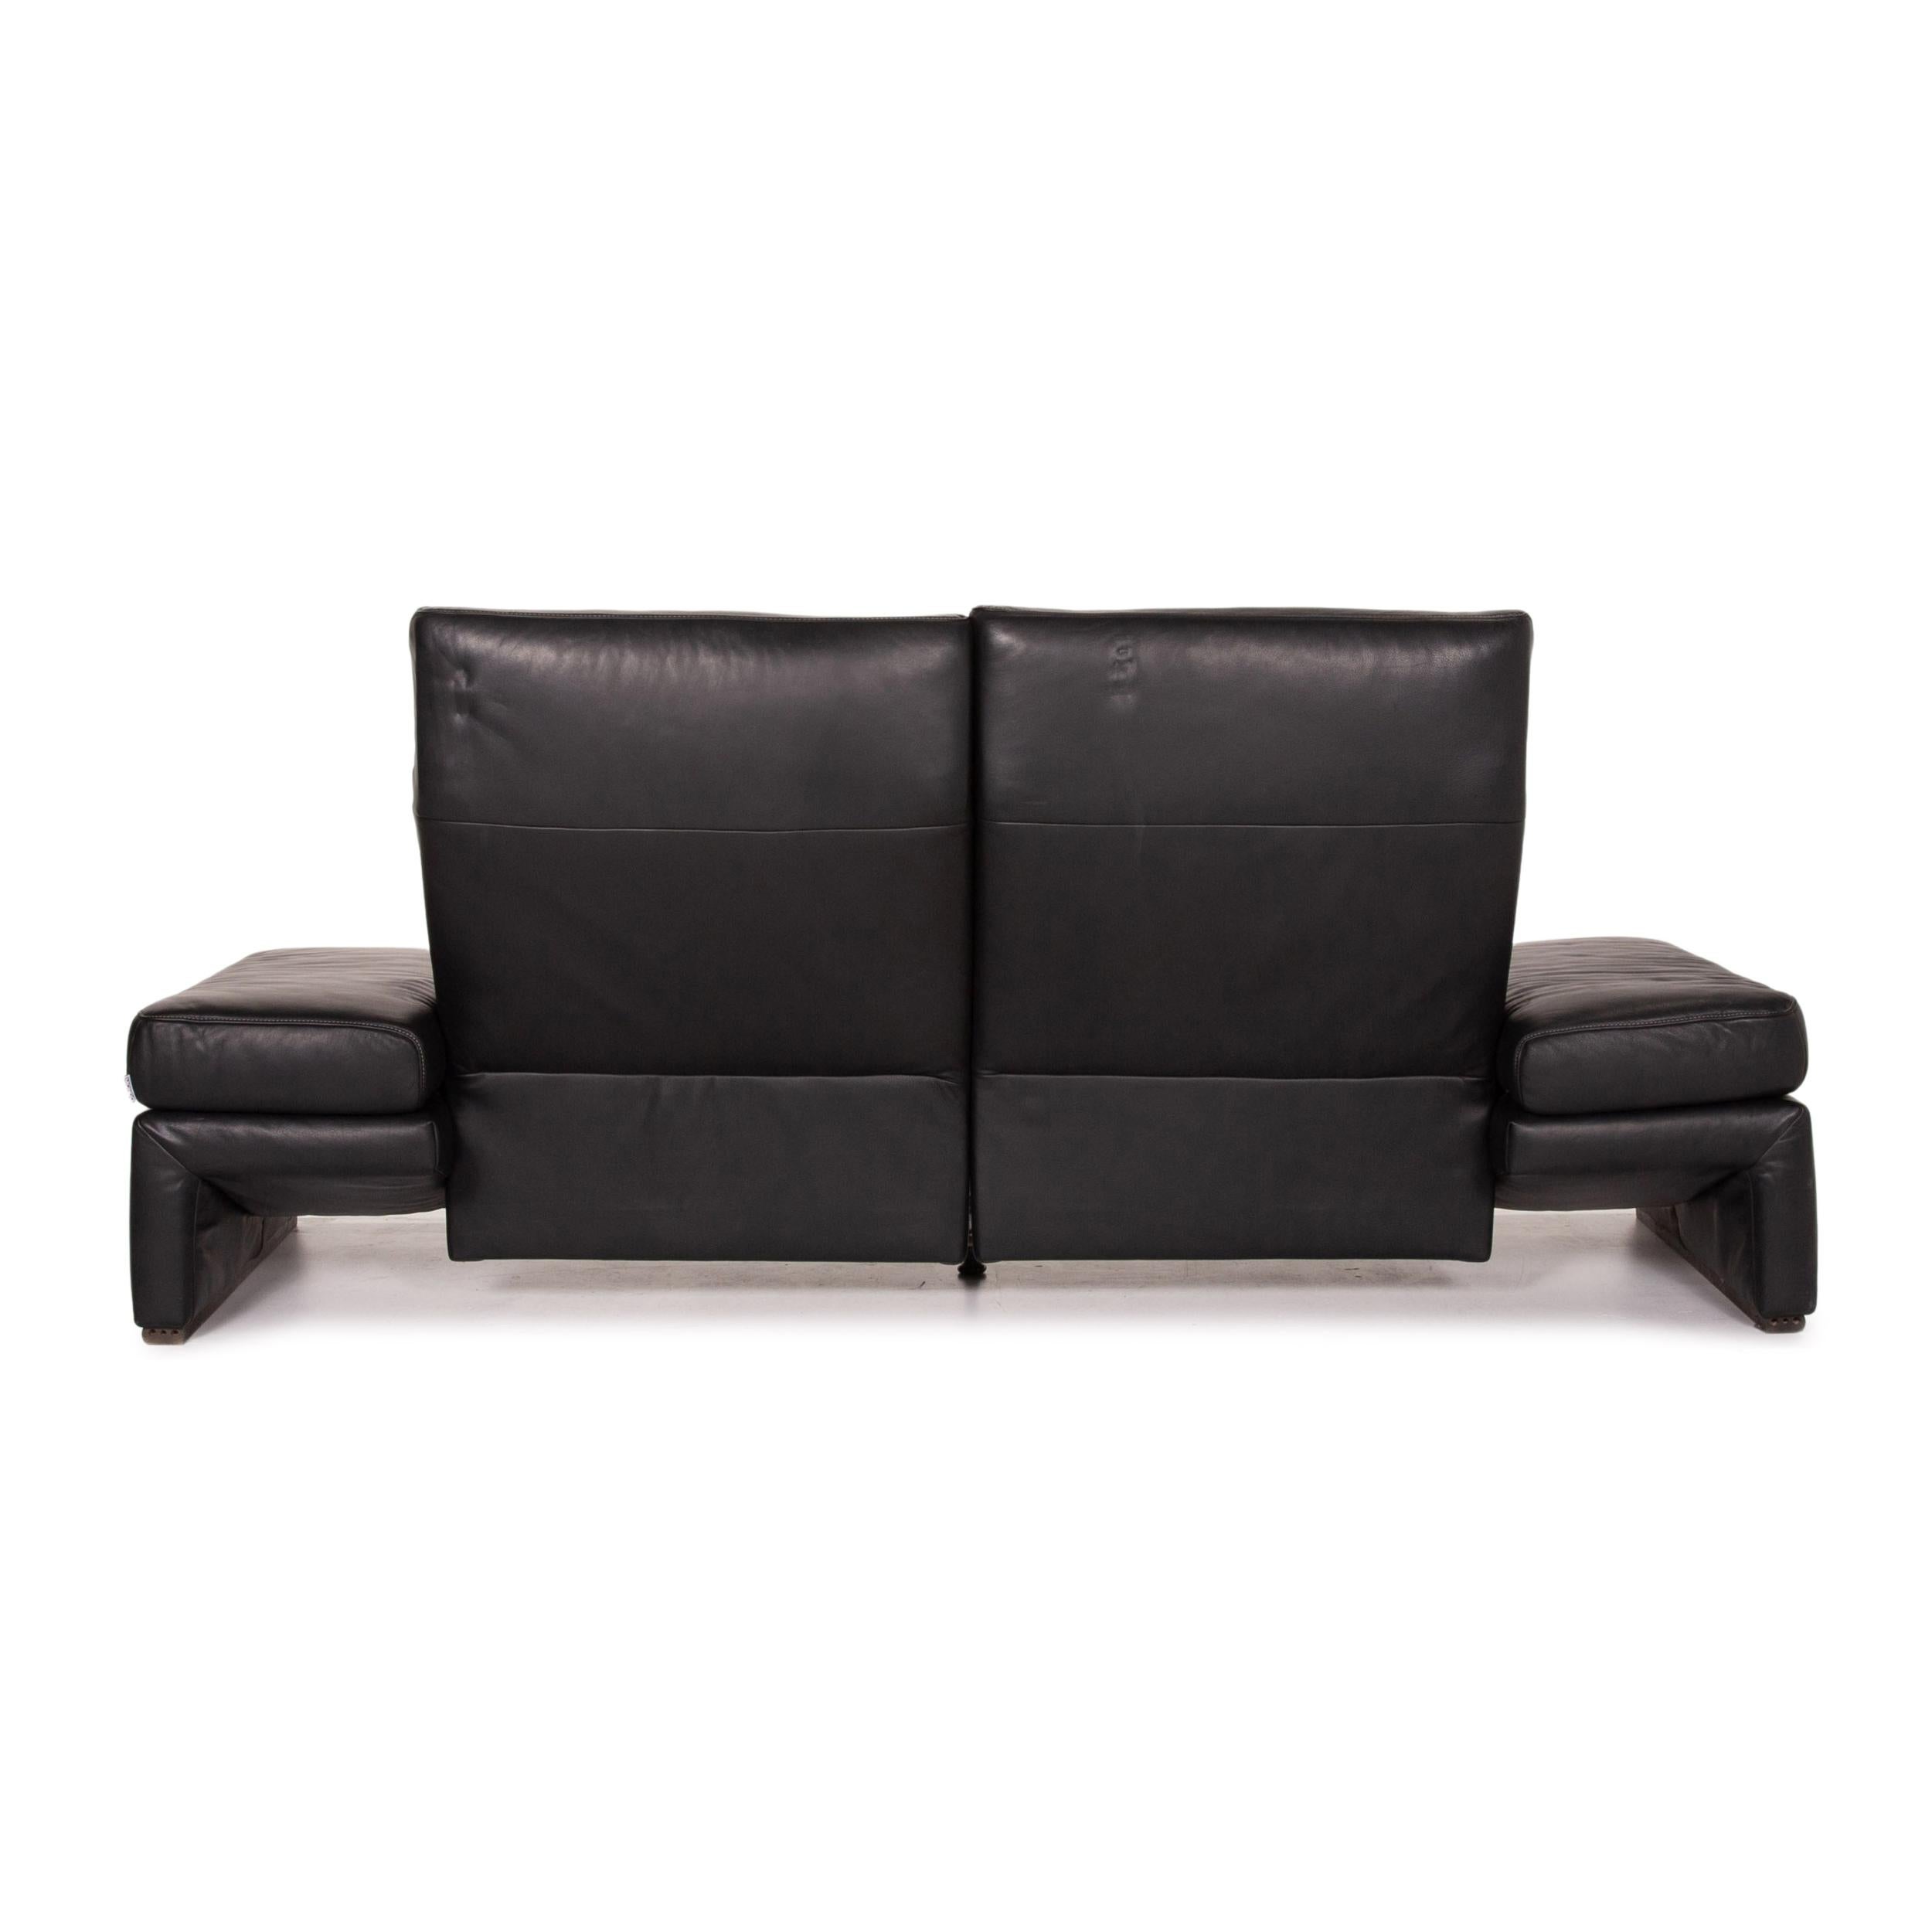 Mondo Leather Sofa Black Three-Seat Electrical Function Relaxation Function 6